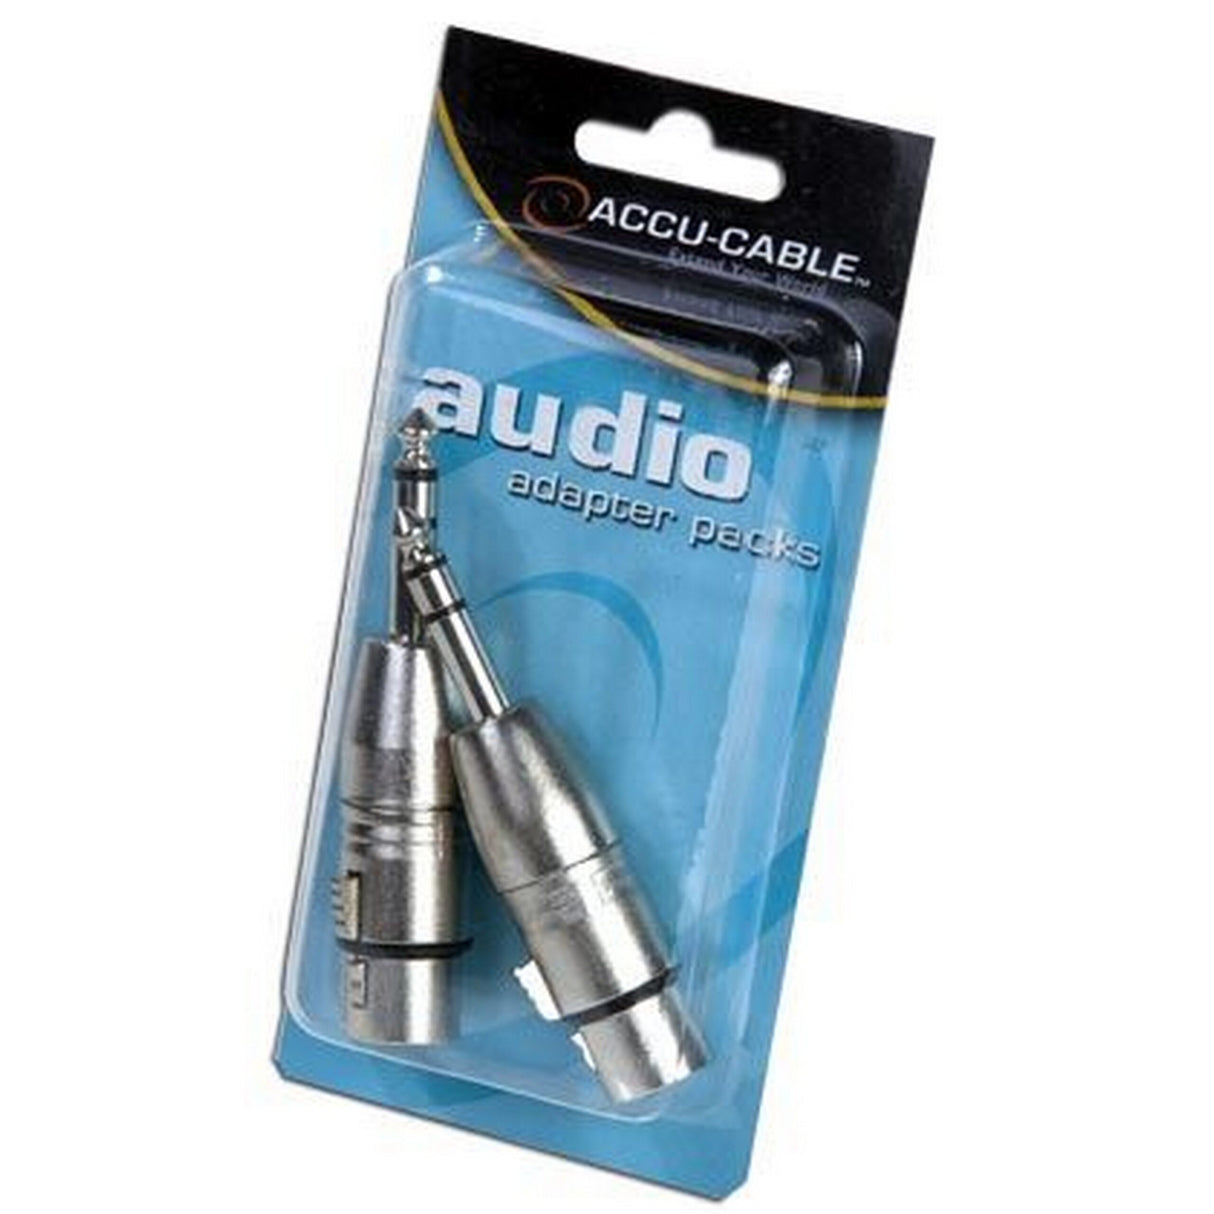 Accu Cable AXLRC3PMQF Female 3-Pin XLR to Male 1/4-Inch Adapter